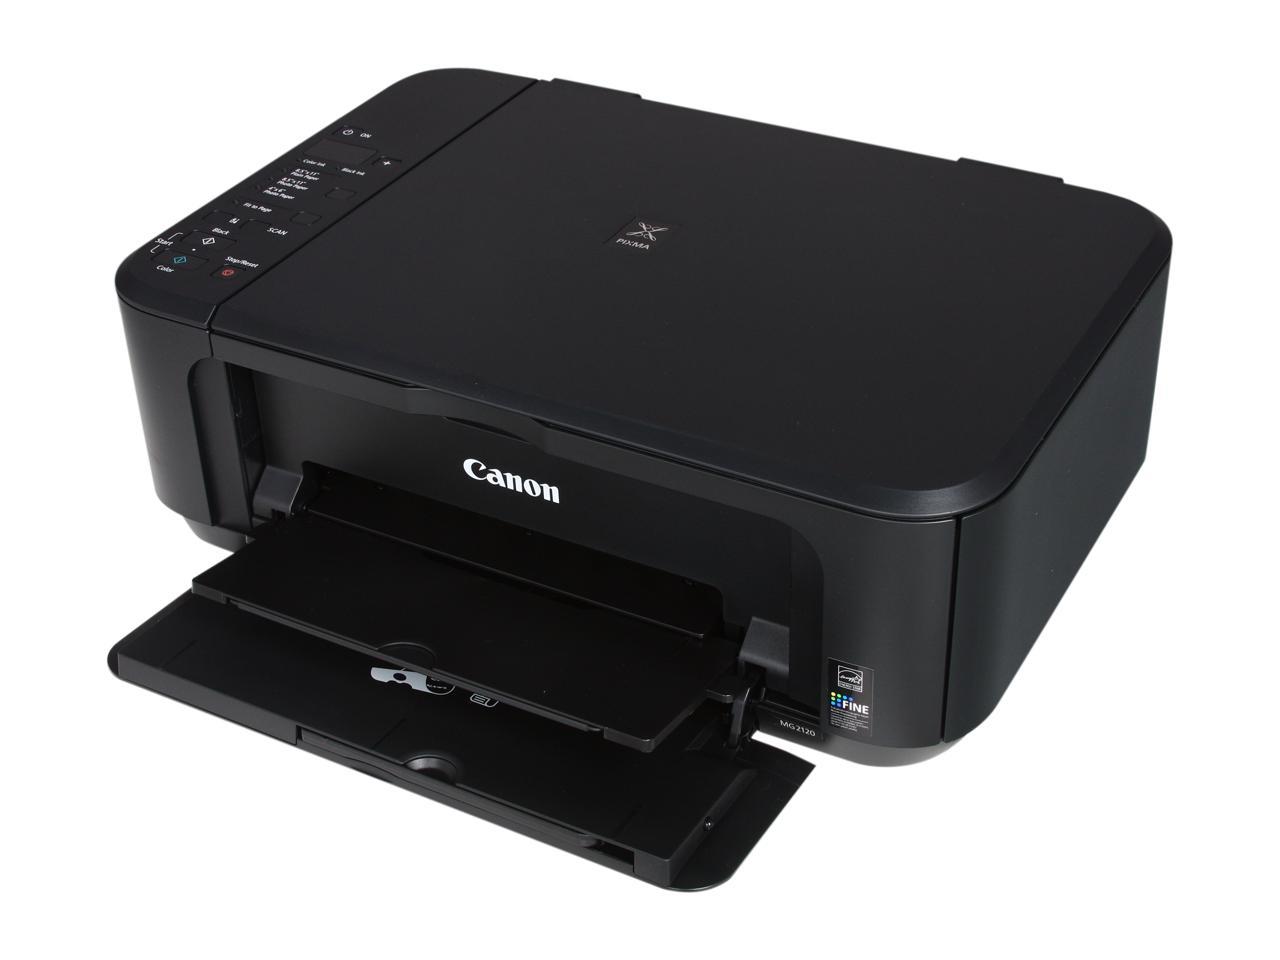 canon pixma scanner software mg 2120